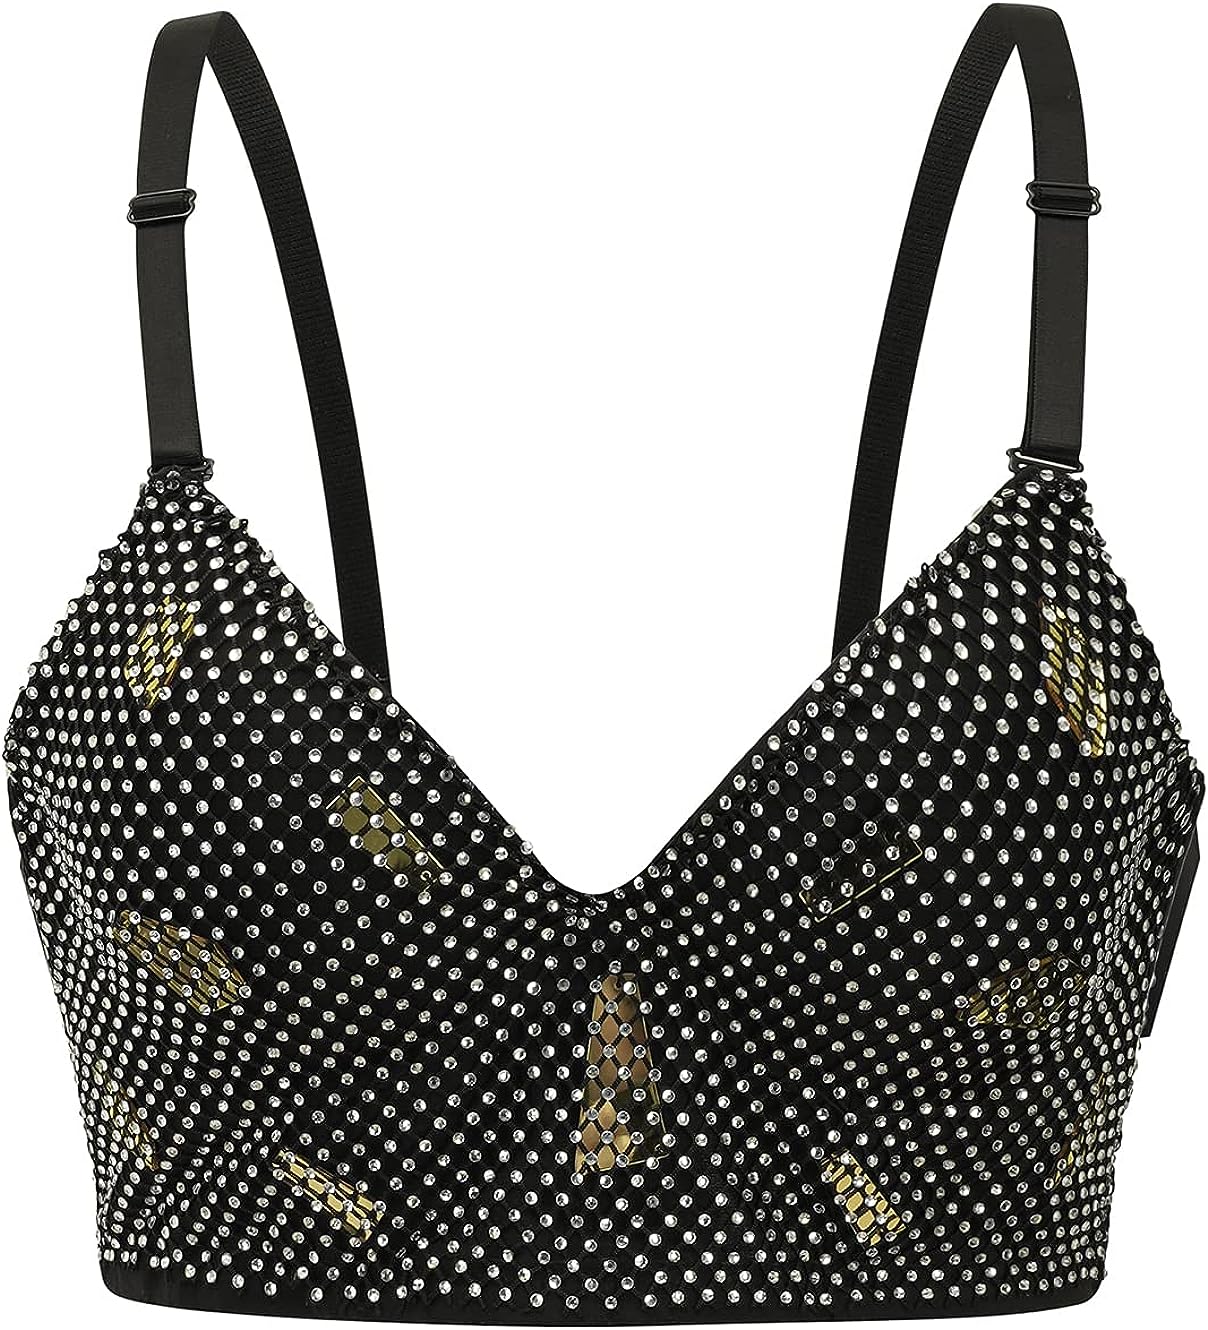  bslingerie® Madonna Style Metallic Studs Bustier Bra Corset Top  (S, Black Floral): Clothing, Shoes & Jewelry